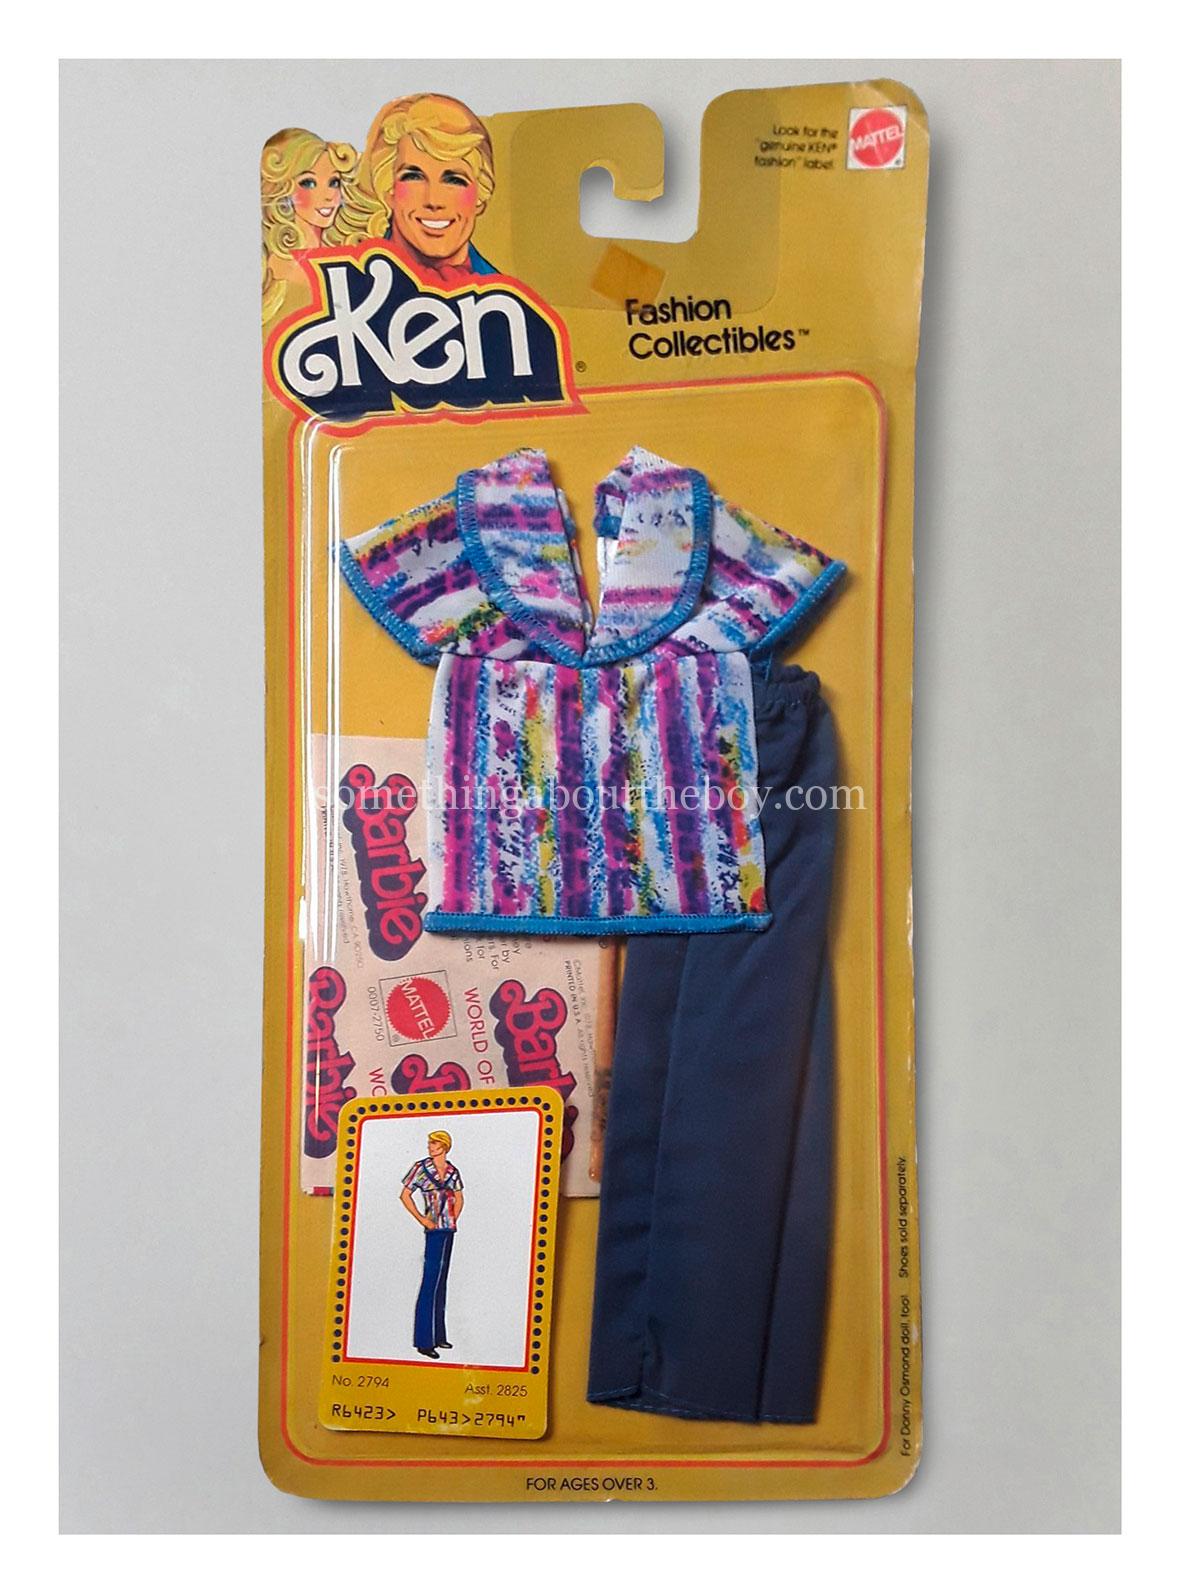 1979 Fashion Collectibles #2794 in original packaging